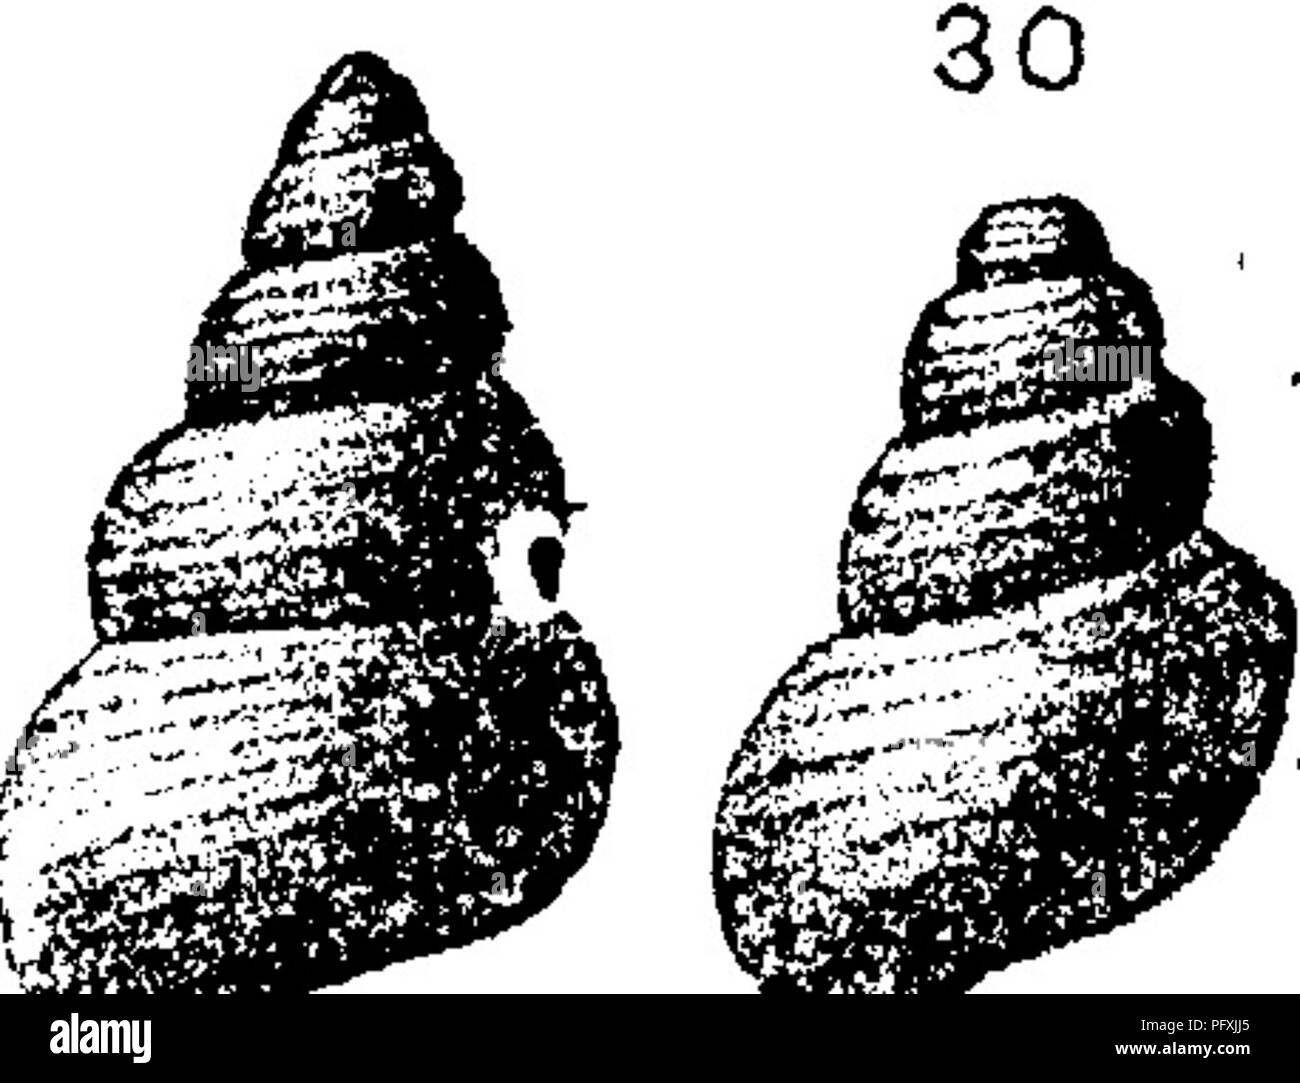 . A dictionary of the fossils of Pennsylvania and neighboring states named in the reports and catalogues of the survey ... Paleontology. H.I7.5./7 Cyclonema bilix. {Pleurotomaria lilix.) Rogers, page lift .A ^^^' fig. &quot;620. Loraine formation. (Conrad, ^ ^^ Jour. Acad. N. Sci. Phila. Vol. 8, 1842. Tren- ton and Hudson river formations ) IIc^ Illh^— The genus Cyclonema (thread-wound) was es- tablished by Hall in Pal. N. Y., Vol. 2, 1852, R. SZO page 89; Ulix being its type species. Cyclonema cancellatum. {littorina cancellata.) Hall, GeoL, 1843, page 72, figs. 17, 5, a young individual fine Stock Photo